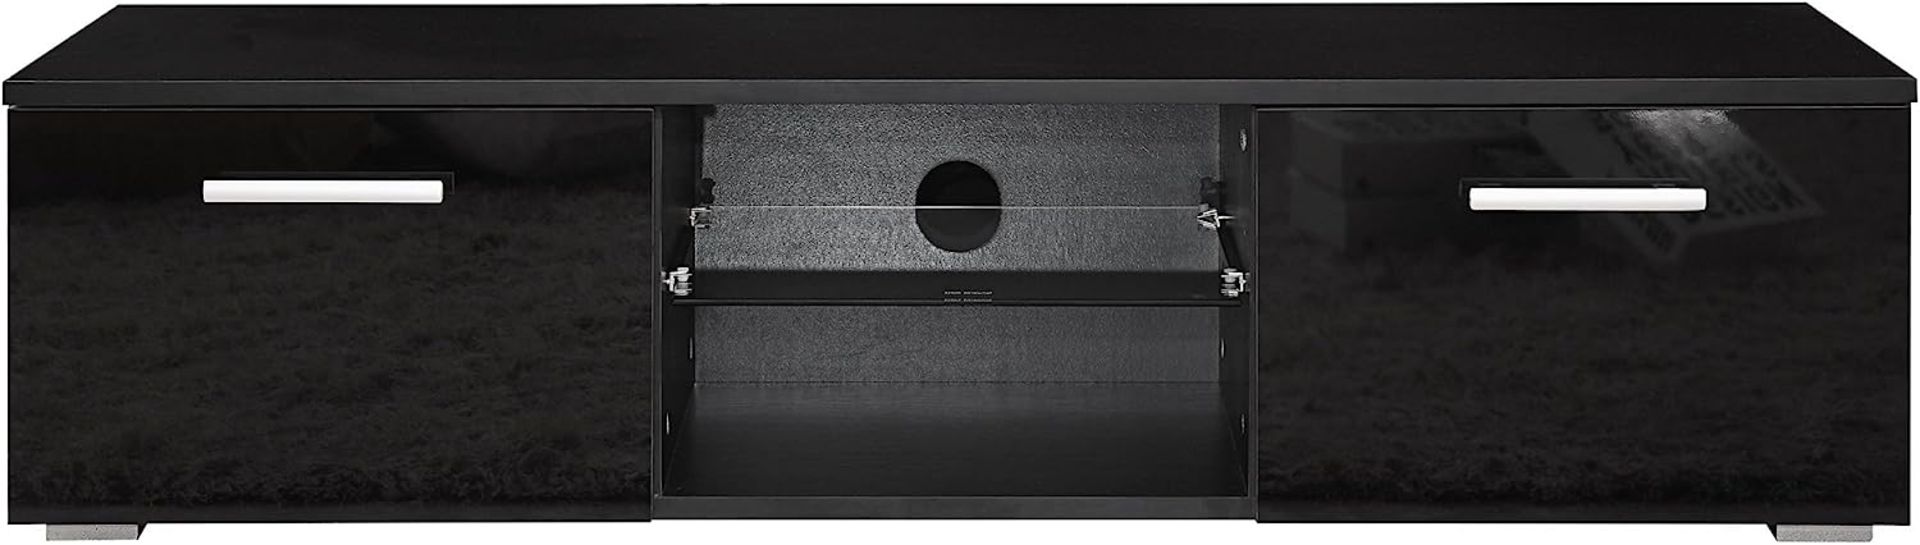 HARMIN MODERN 120CM TV STAND CABINET UNIT WITH HIGH GLOSS DOORS (BLACK ON BLACK) - Image 4 of 9